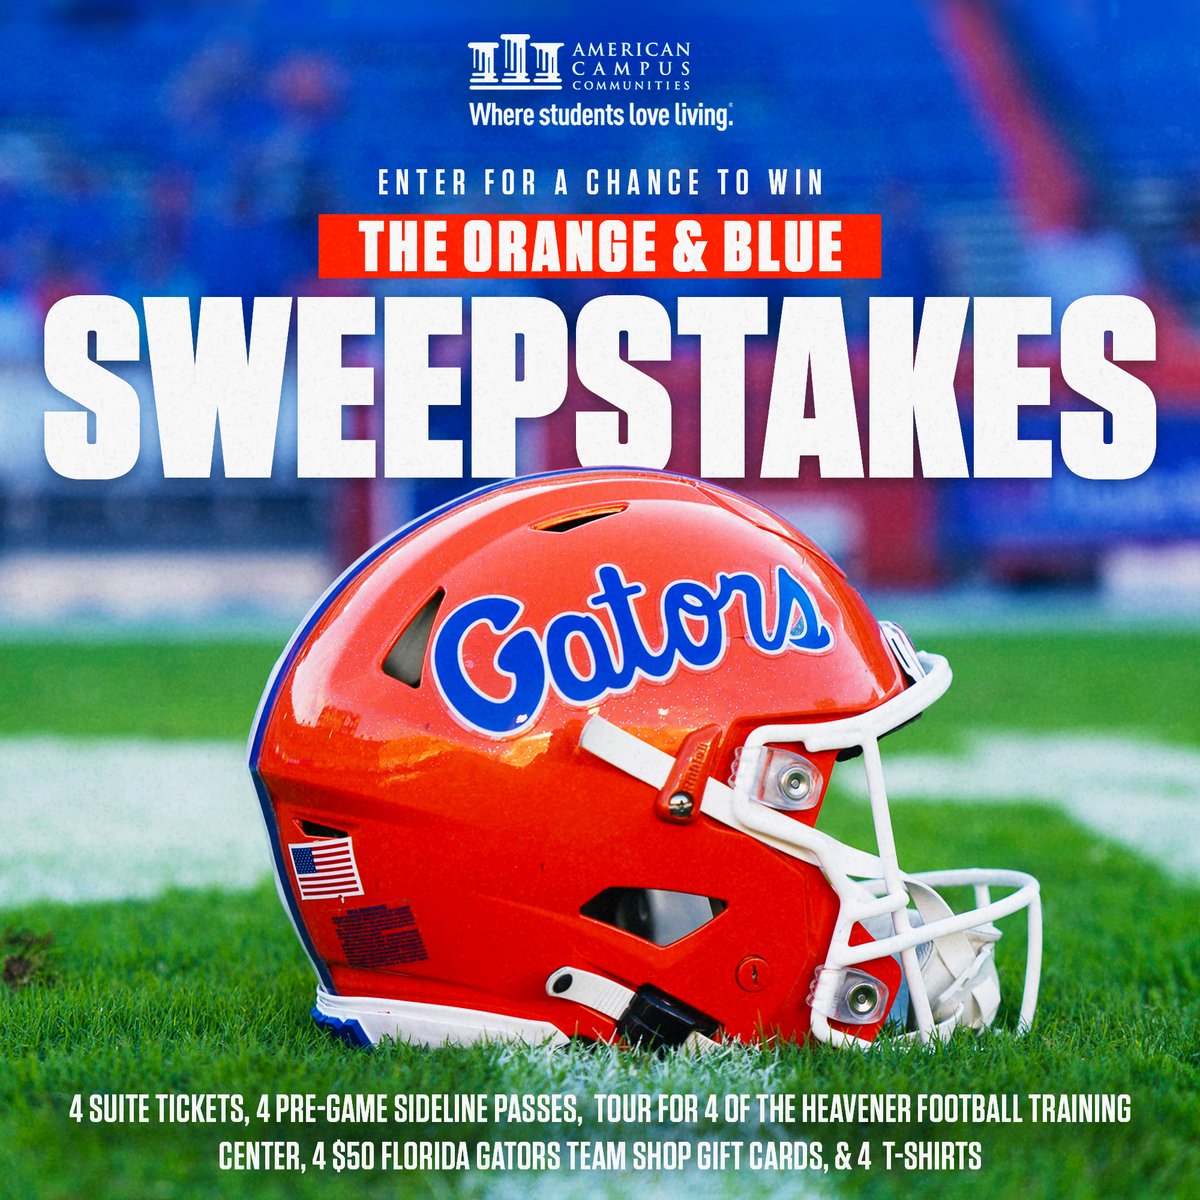 Hey Gators!🐊 We've teamed up with @AmericanCampus to give away the 𝙪𝙡𝙩𝙞𝙢𝙖𝙩𝙚 VIP experience at the Orange & Blue game for you and your three friends on April 13th! 🏈 𝙀𝙉𝙏𝙀𝙍 𝙃𝙀𝙍𝙀: bit.ly/3PpSMF3 #GoGators